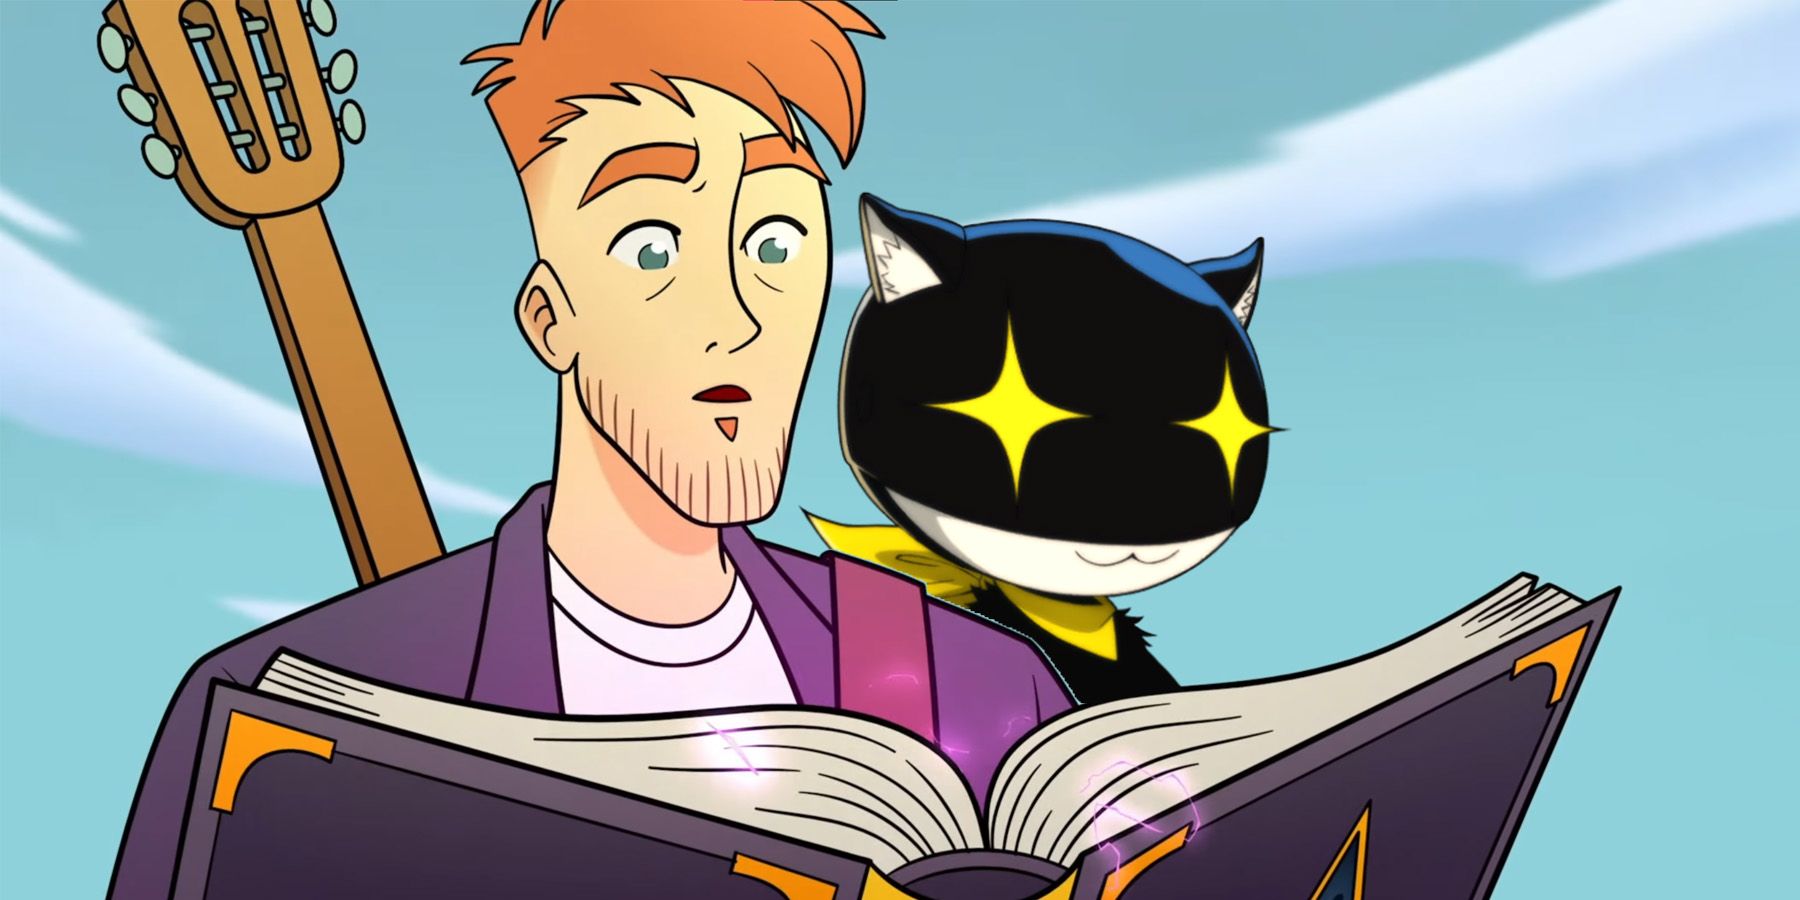 Bestiario Axis Soldado and Morgana from Persona 5 looking at magical purple book composite